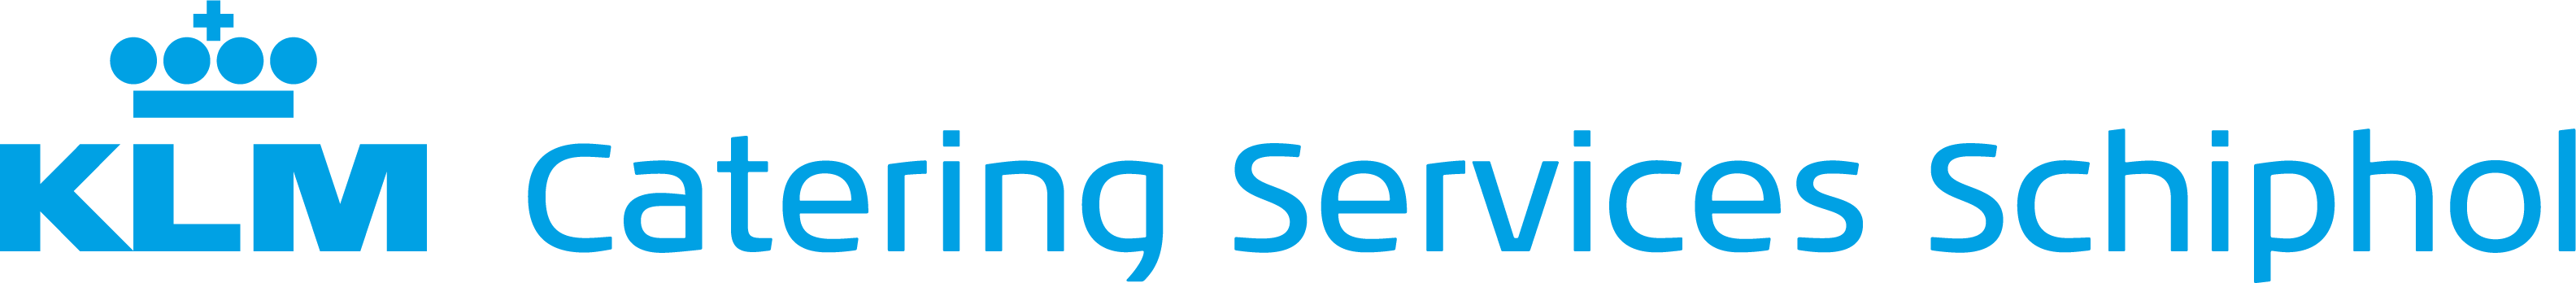 KLM Catering Services logo